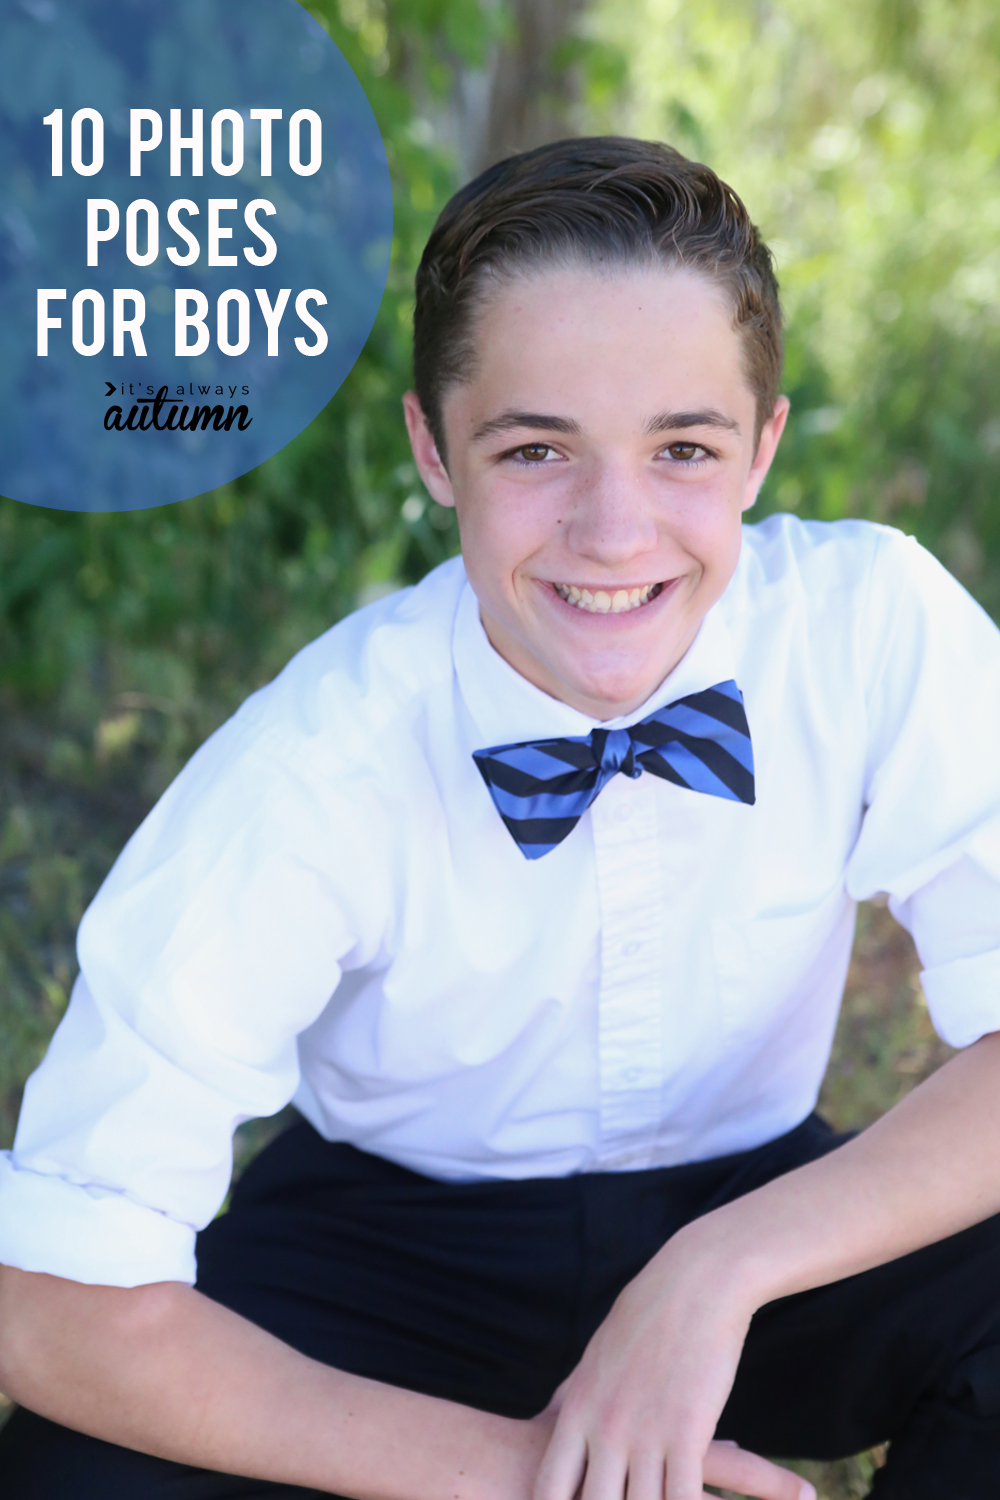 photo poses for boys 1